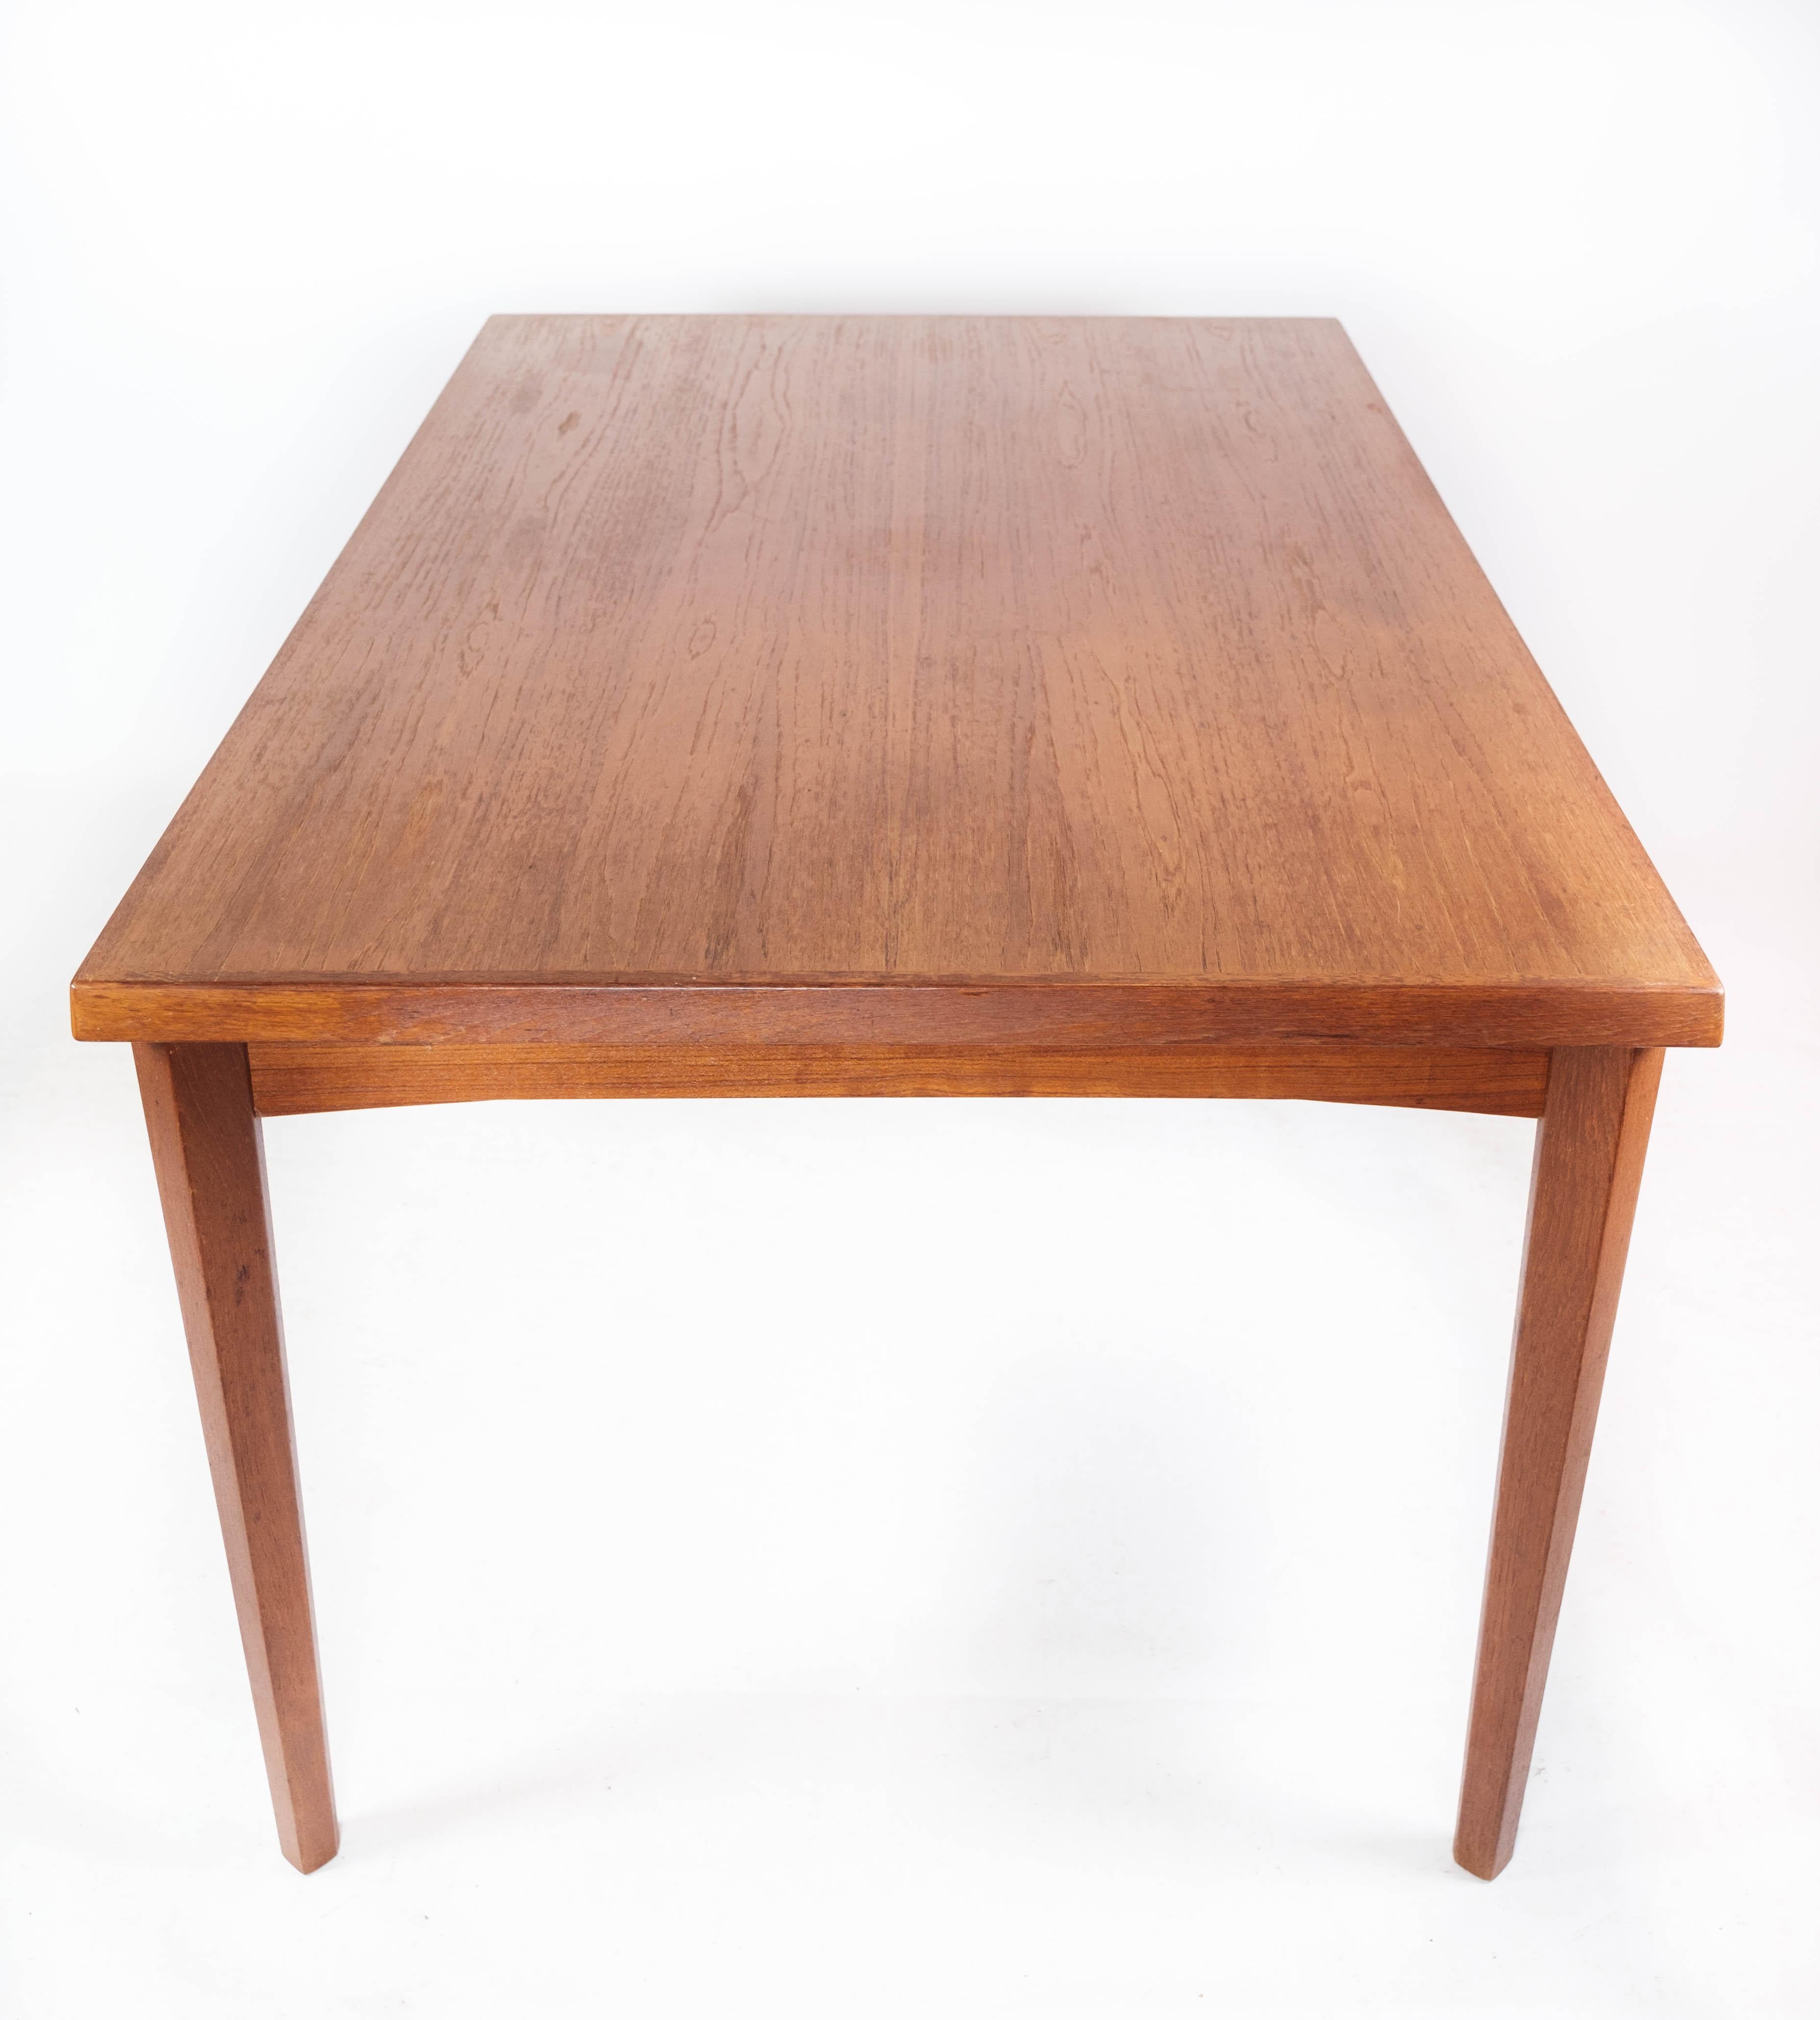 Dining Table in Teak with Extension Plates, of Danish Design from the 1960s For Sale 4